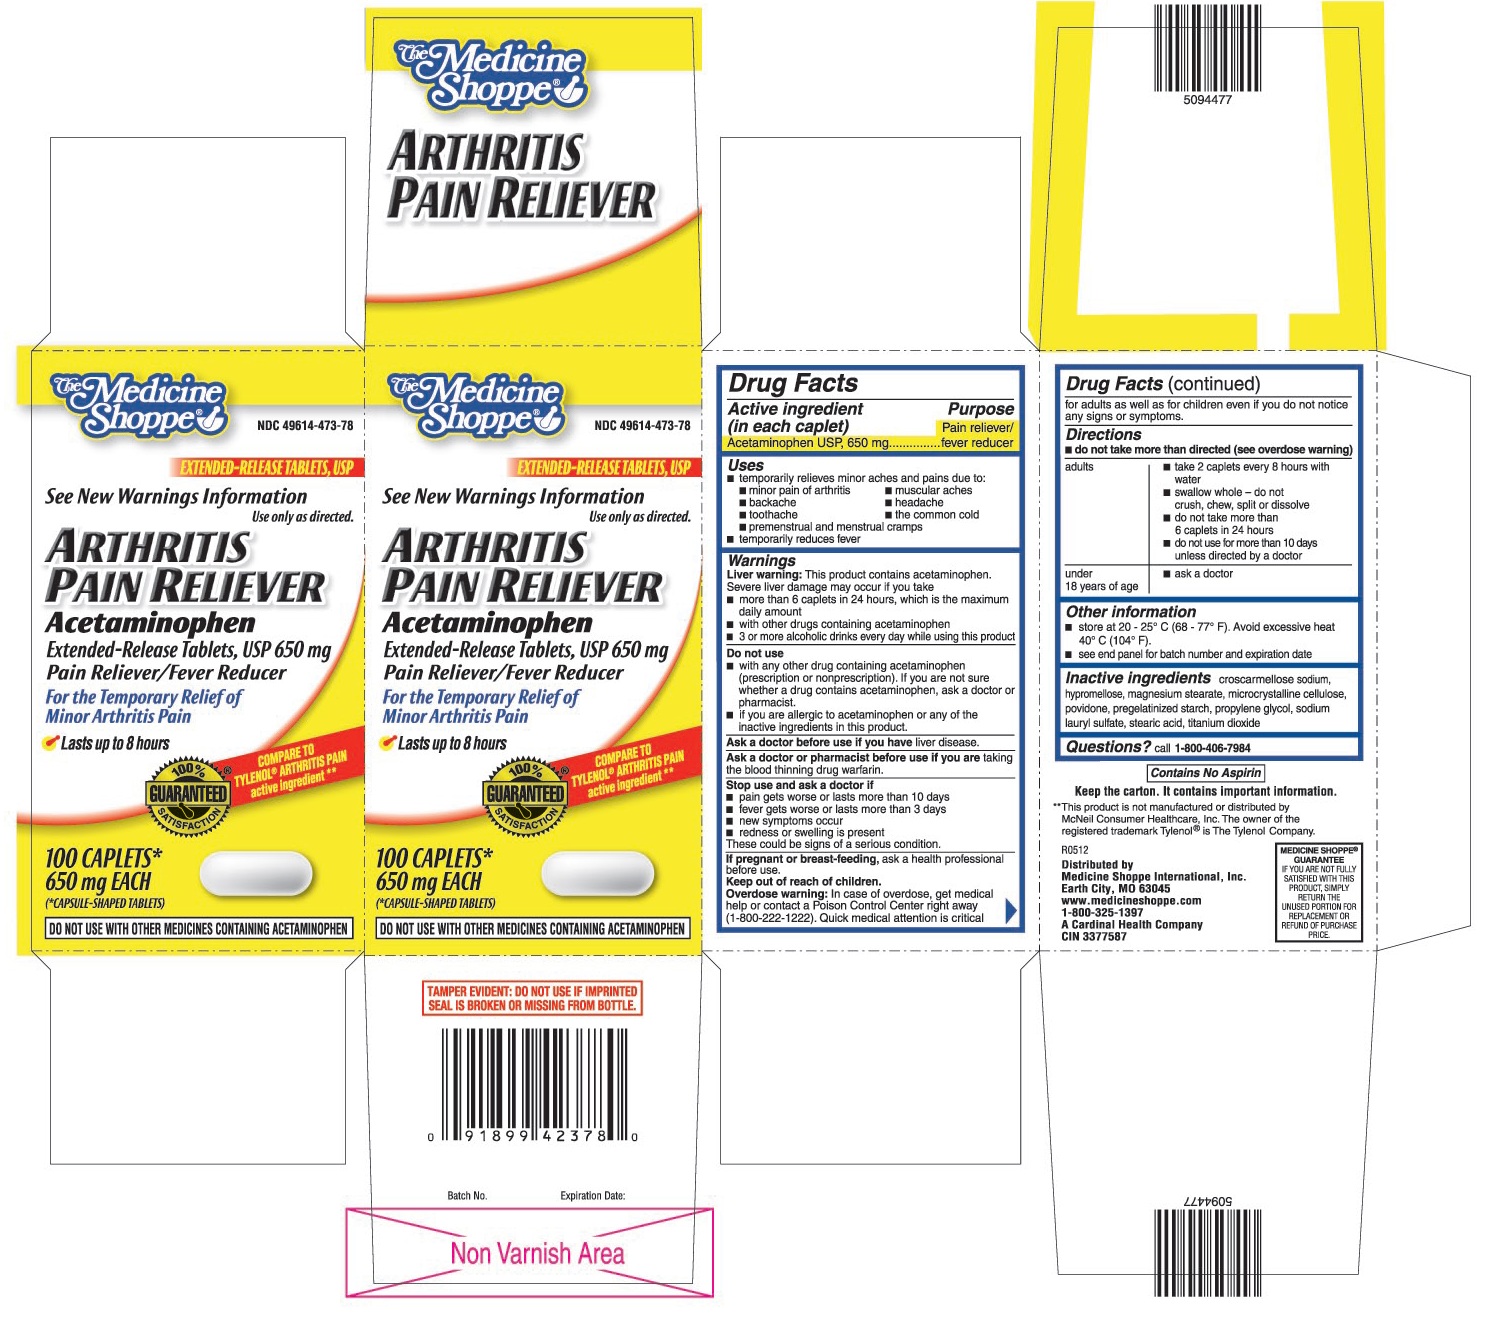 This is the 100 count bottle carton label for Medshoppe arthritis pain reliever Acetaminophen extended-release tablets, USP 650 mg.